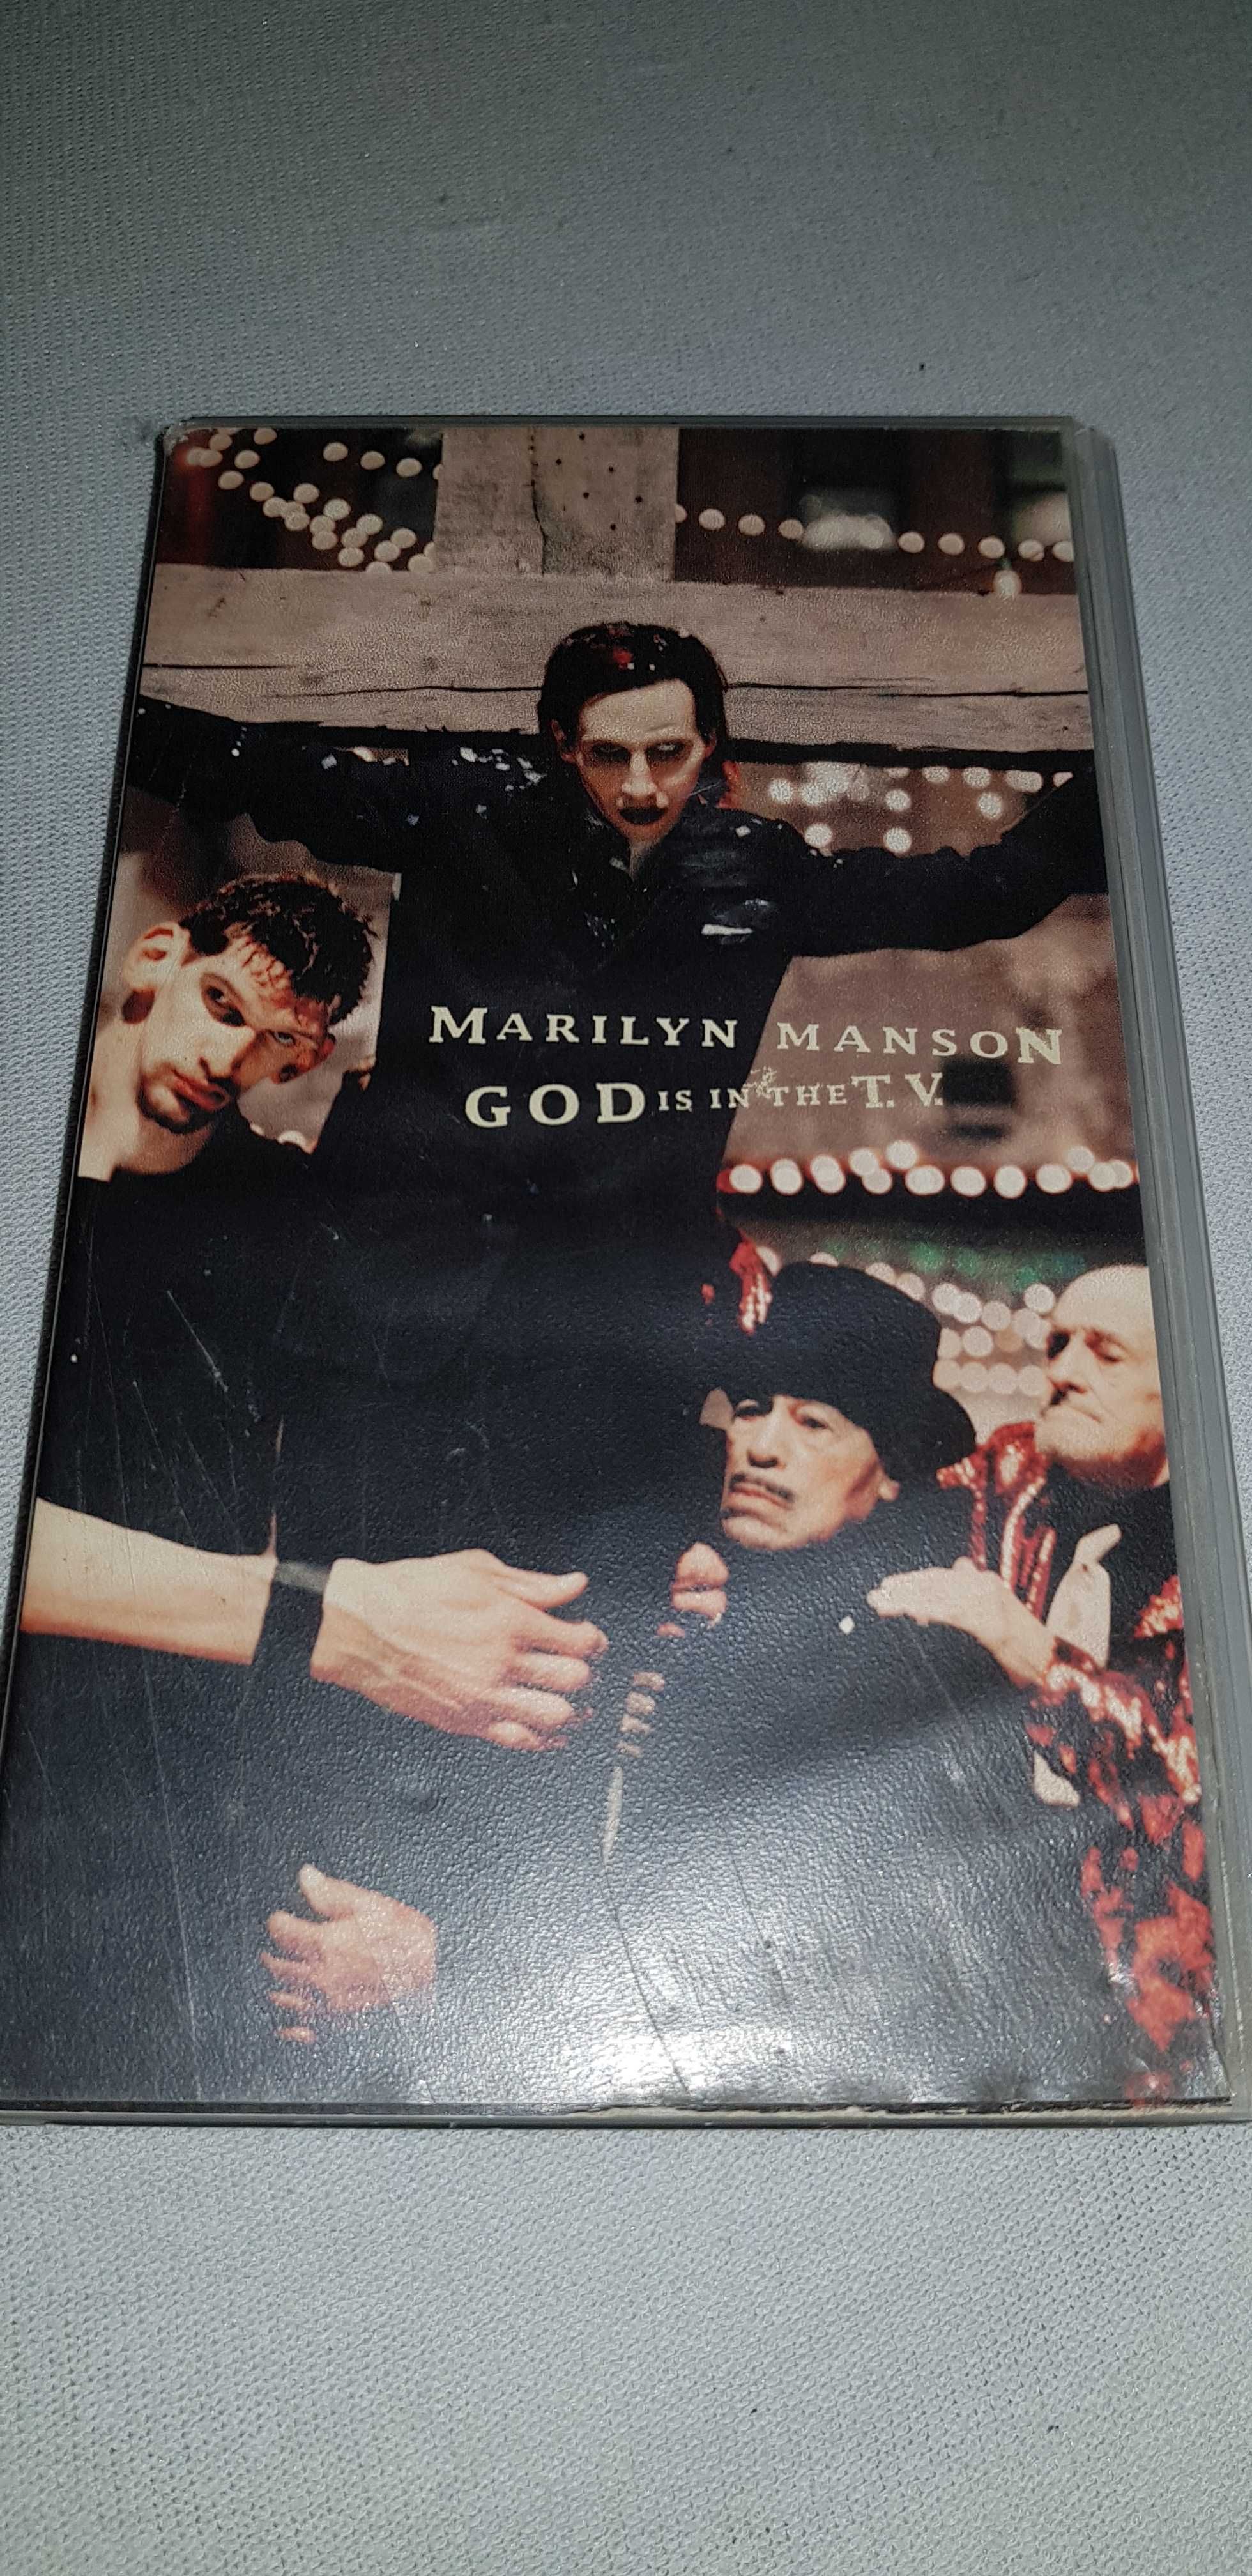 Marilyn Manson – God Is In The T.V. (1999, VHS)